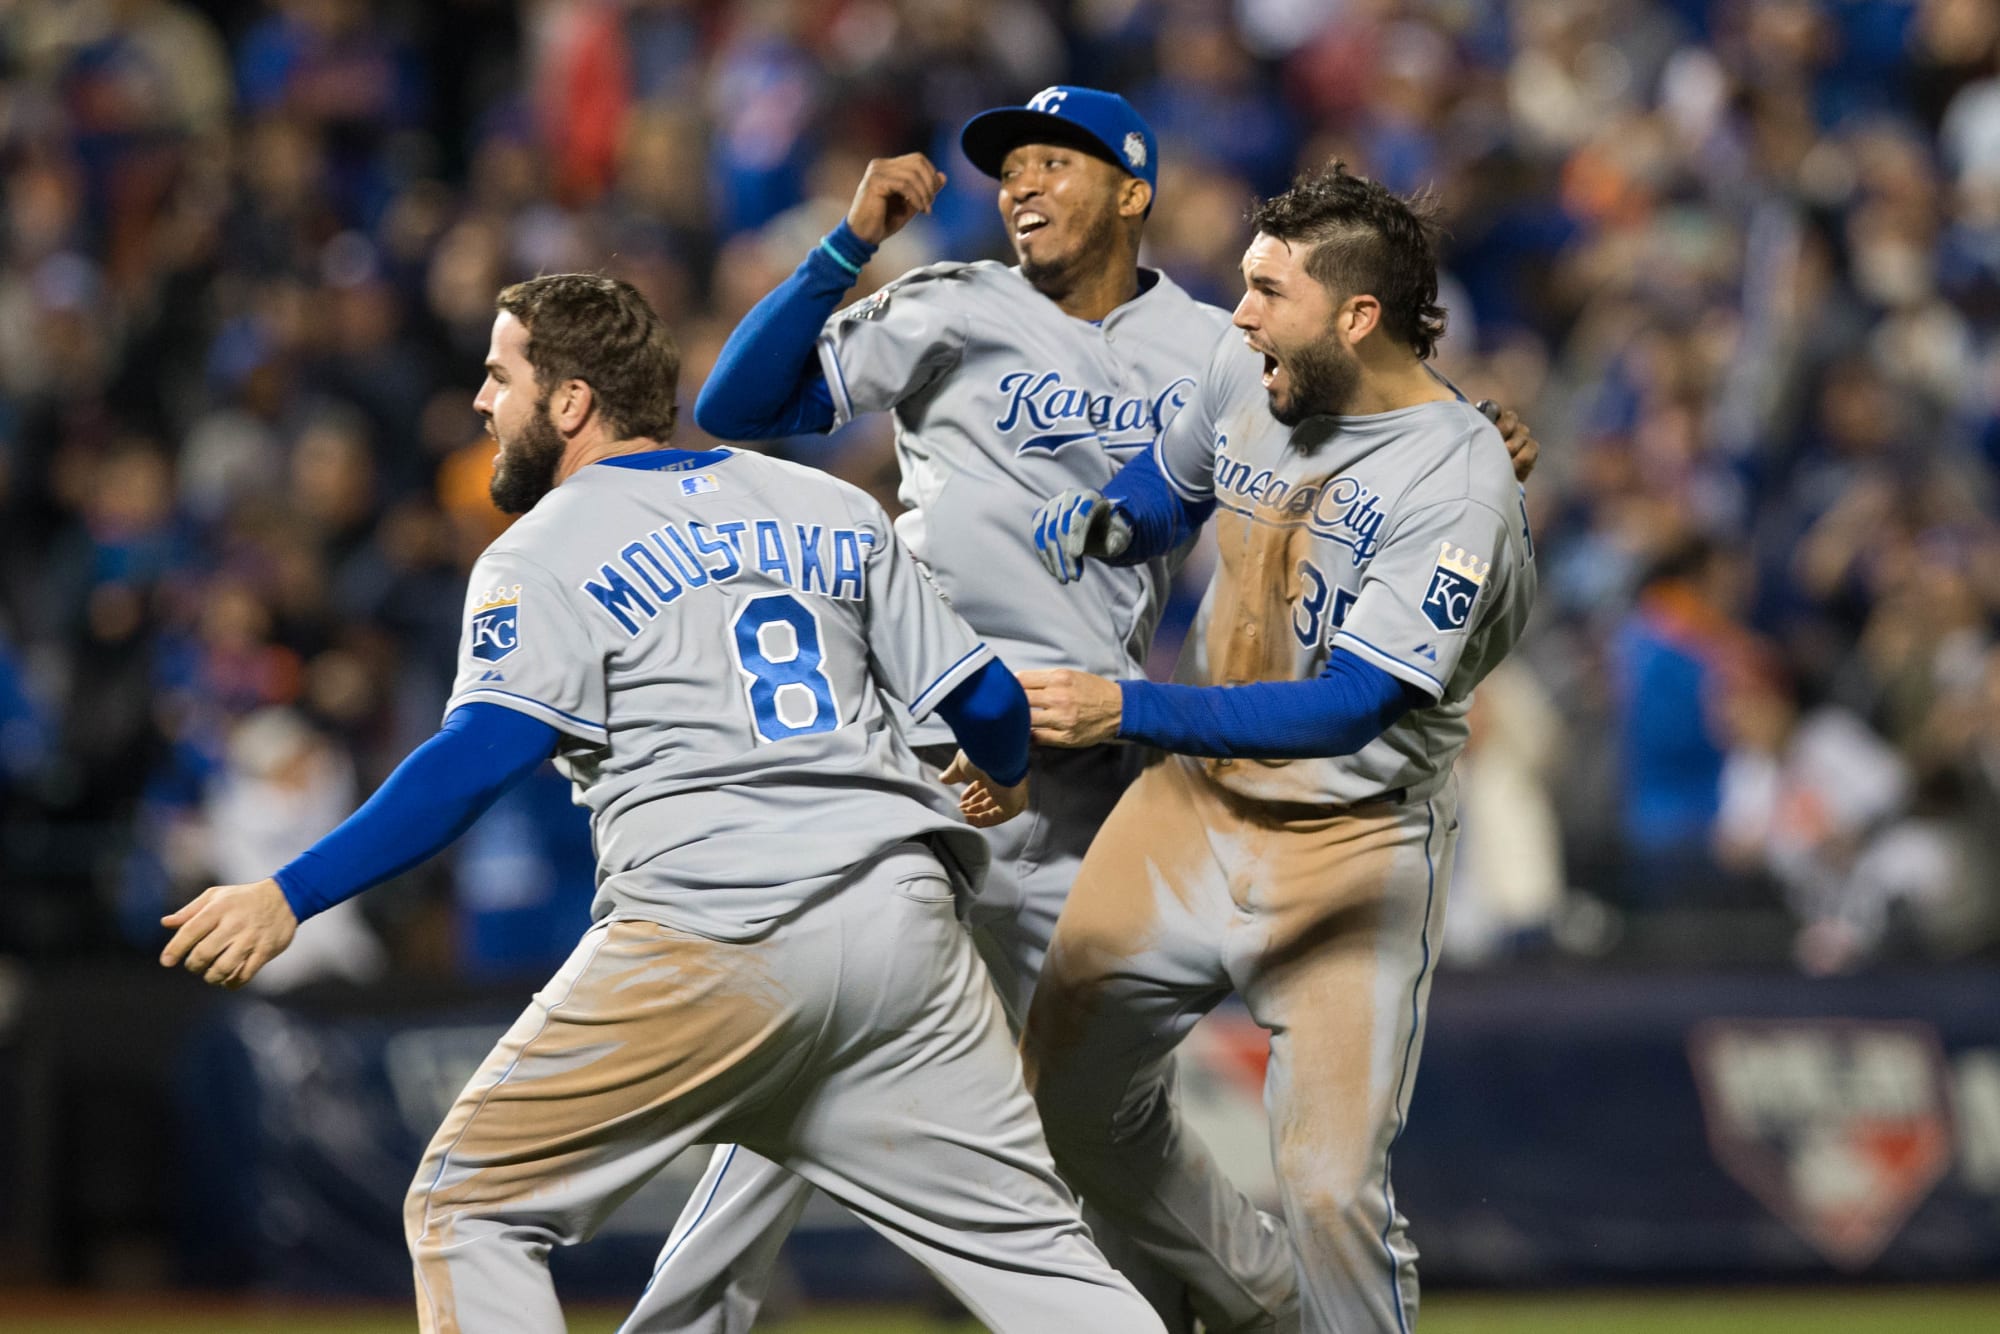 Be It Mets or Royals, Winner of World Series Will End a Long